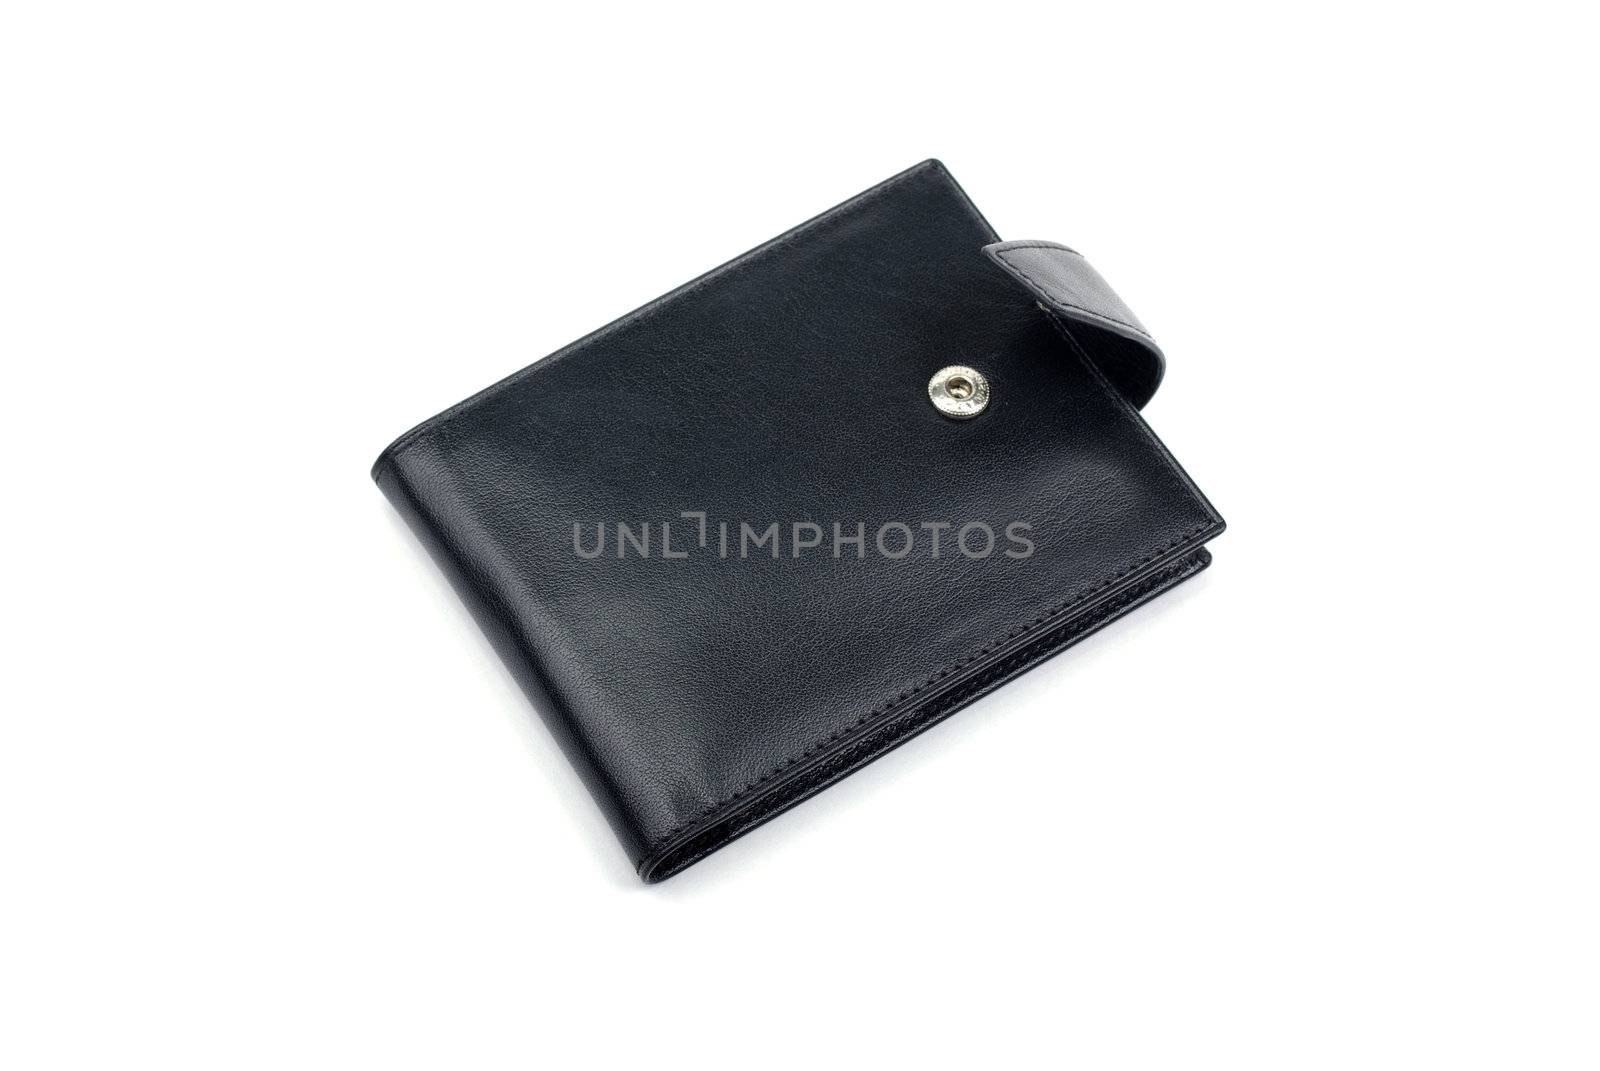 Black leather business card holder isolated on white background